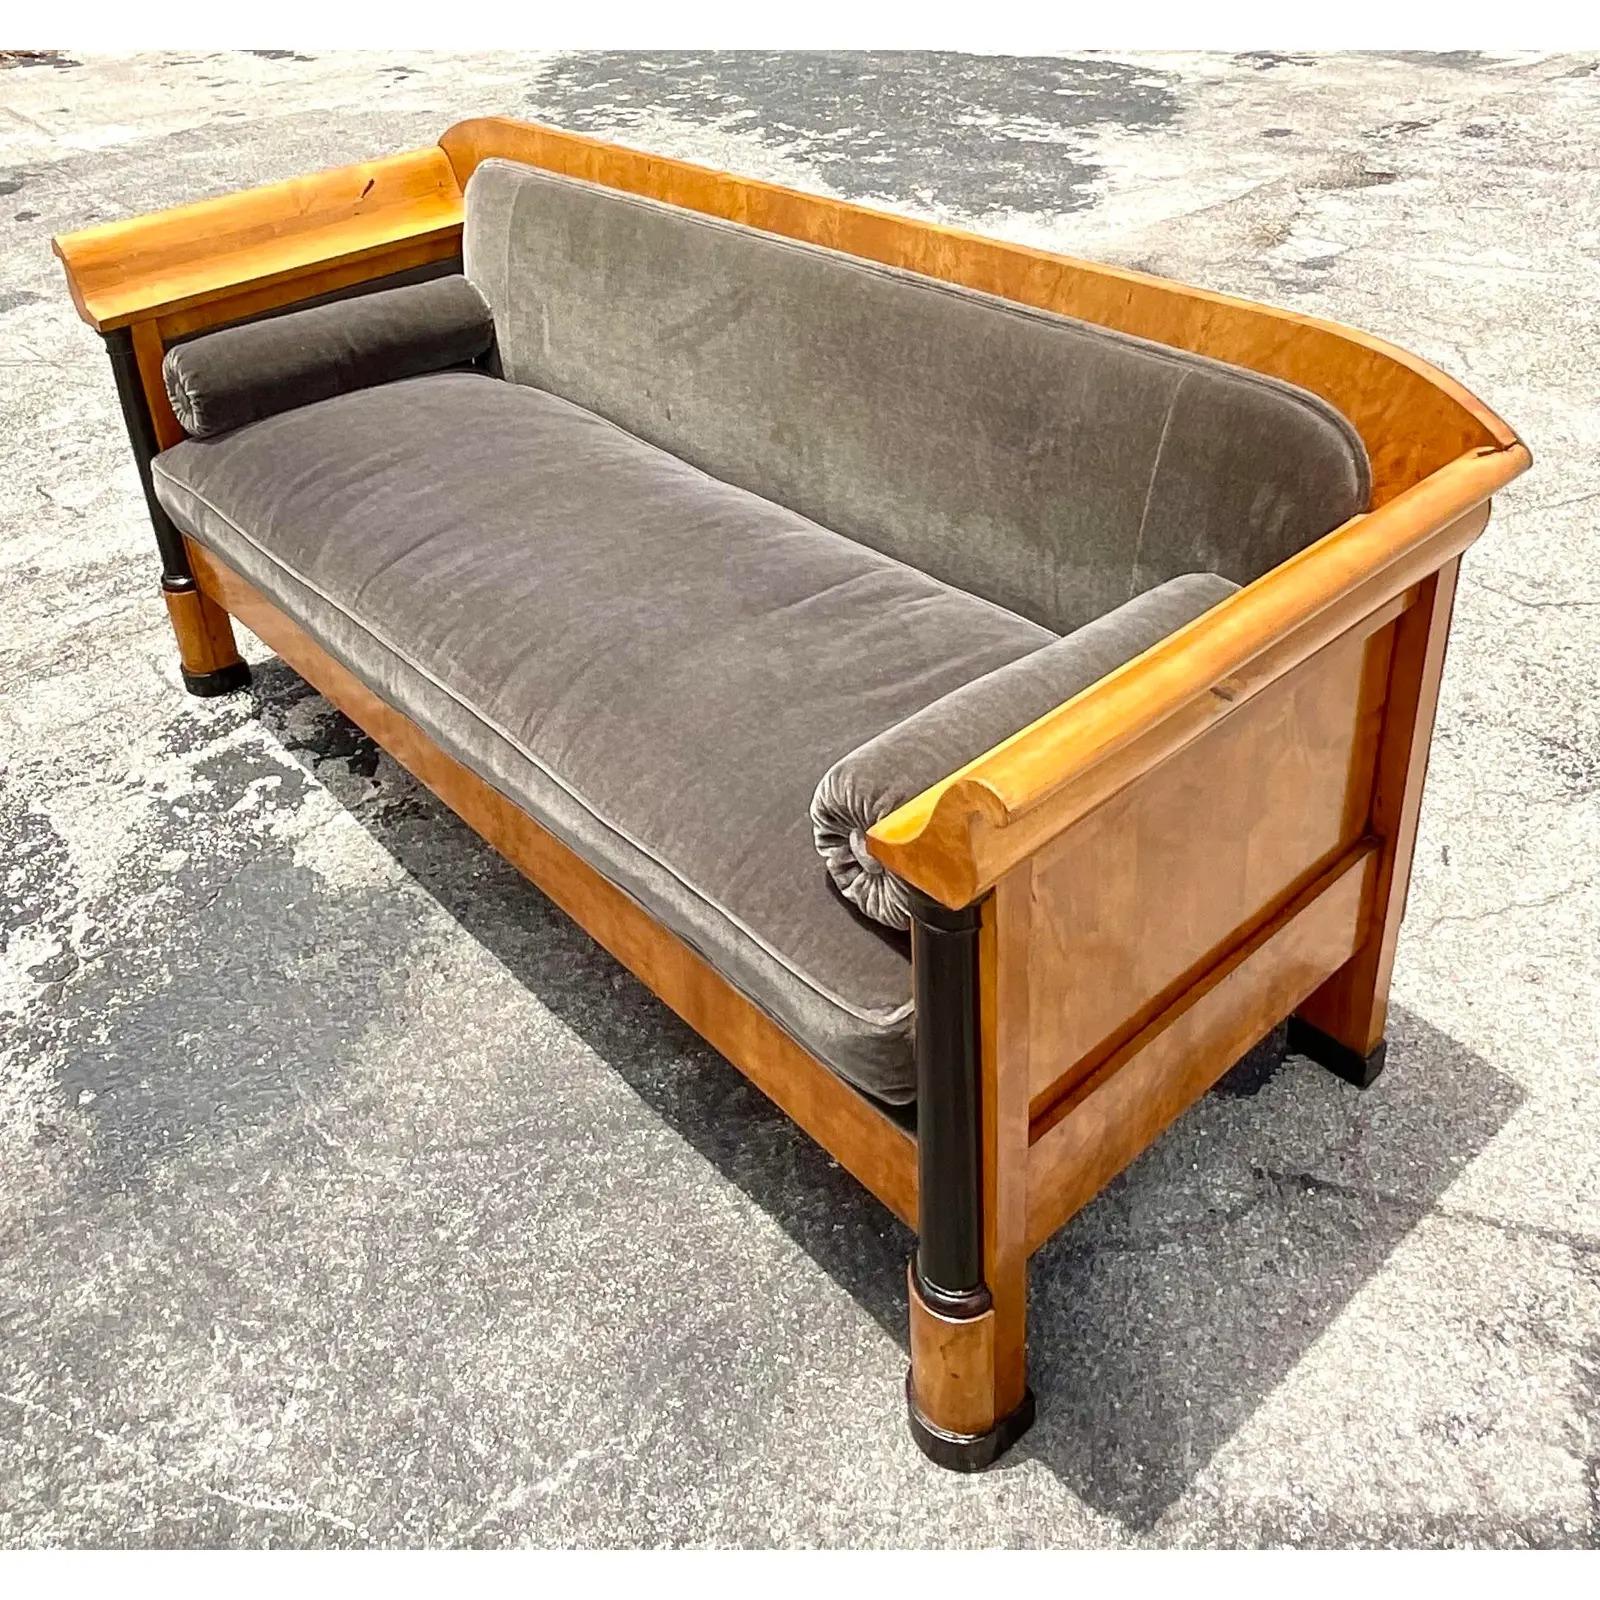 Incredible vintage Swedish Biedermeier sofa. Beautiful Burl wood maple frame with a chic grey mohair upholstery. Glossy black classic details. Acquired from a Palm Beach estate.